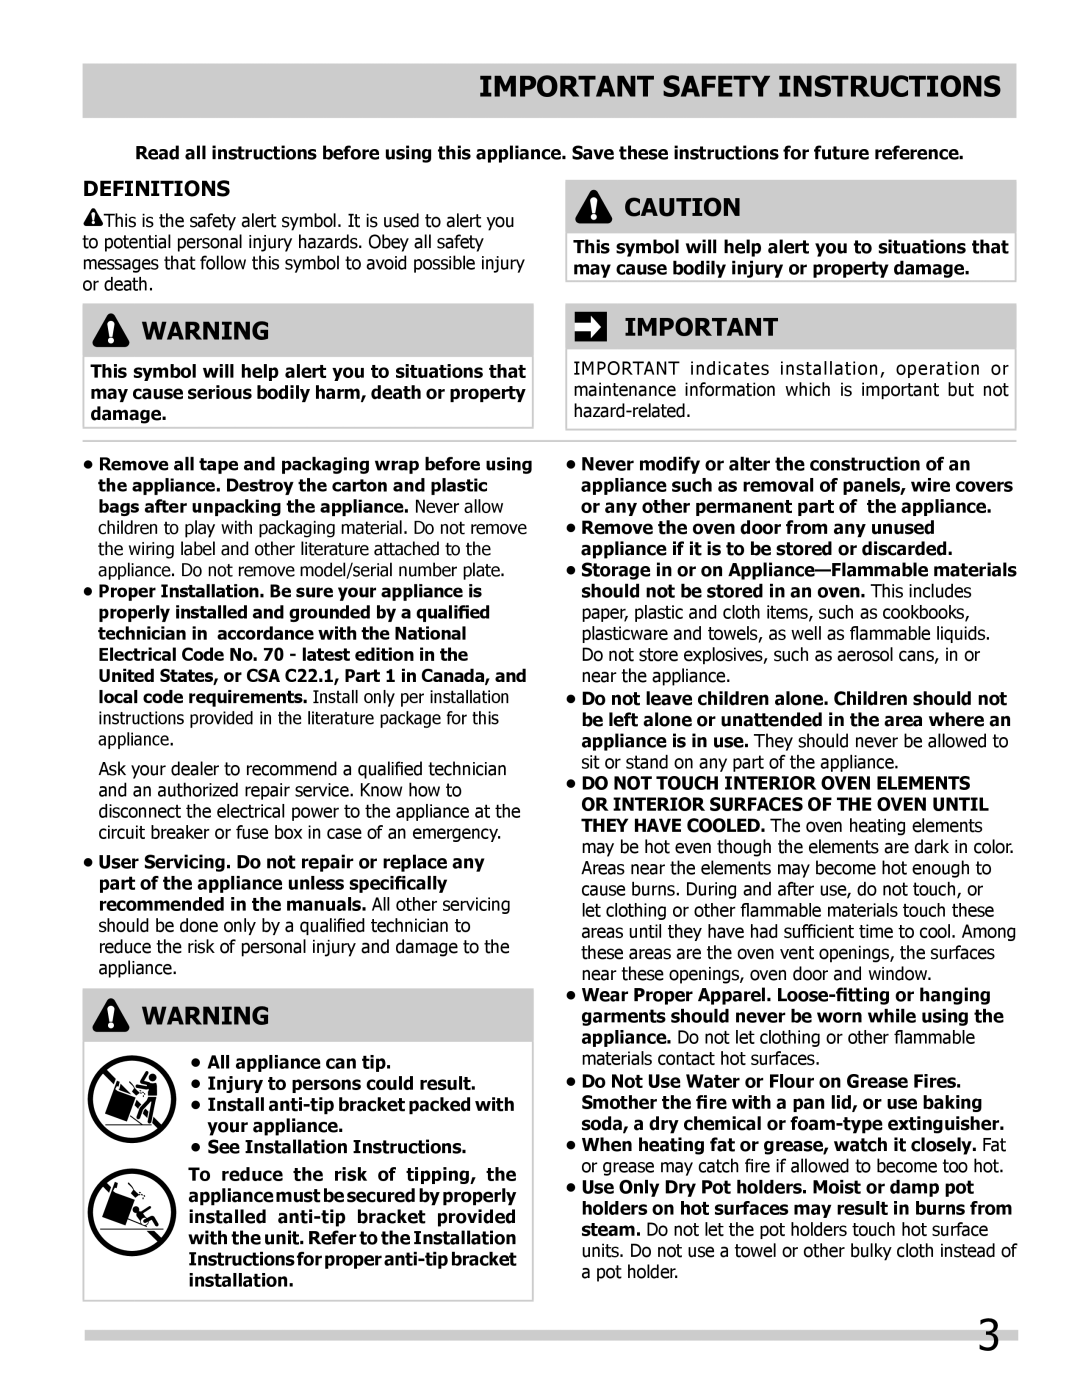 Frigidaire 318205302 manual Important Safety Instructions, Definitions, Electrical Code No. 70 - latest edition in the 